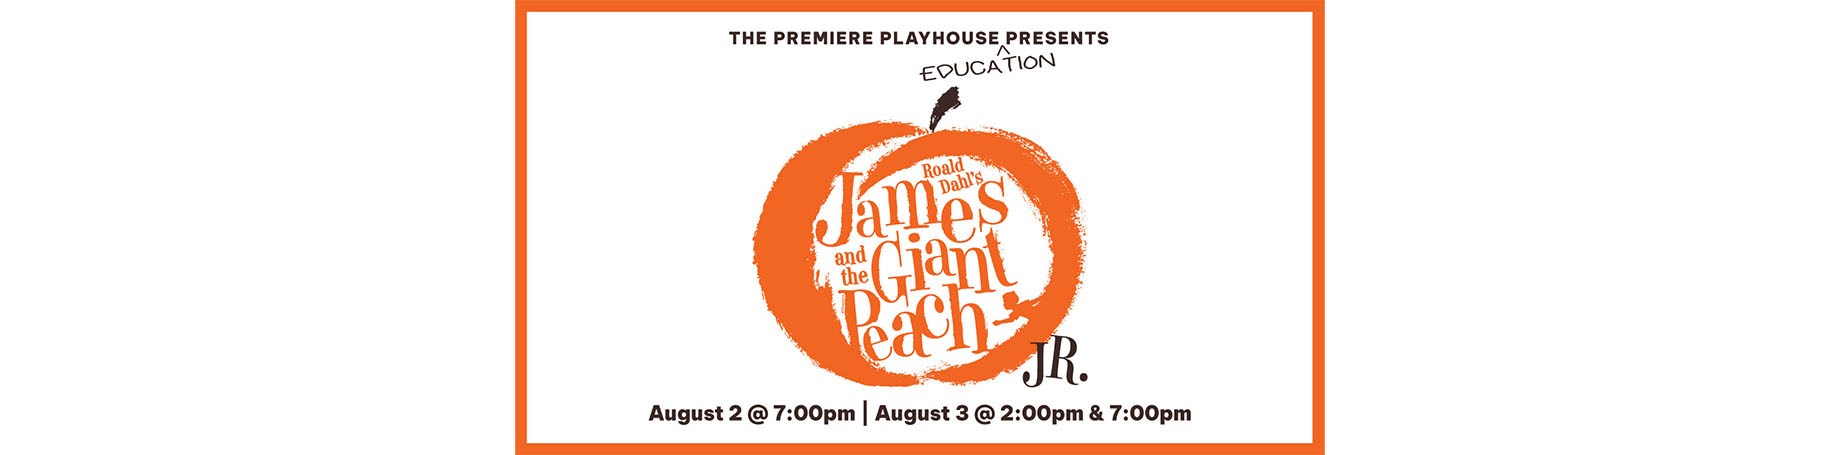 The Premiere Playhouse presents James & The Giant Peach Jr.